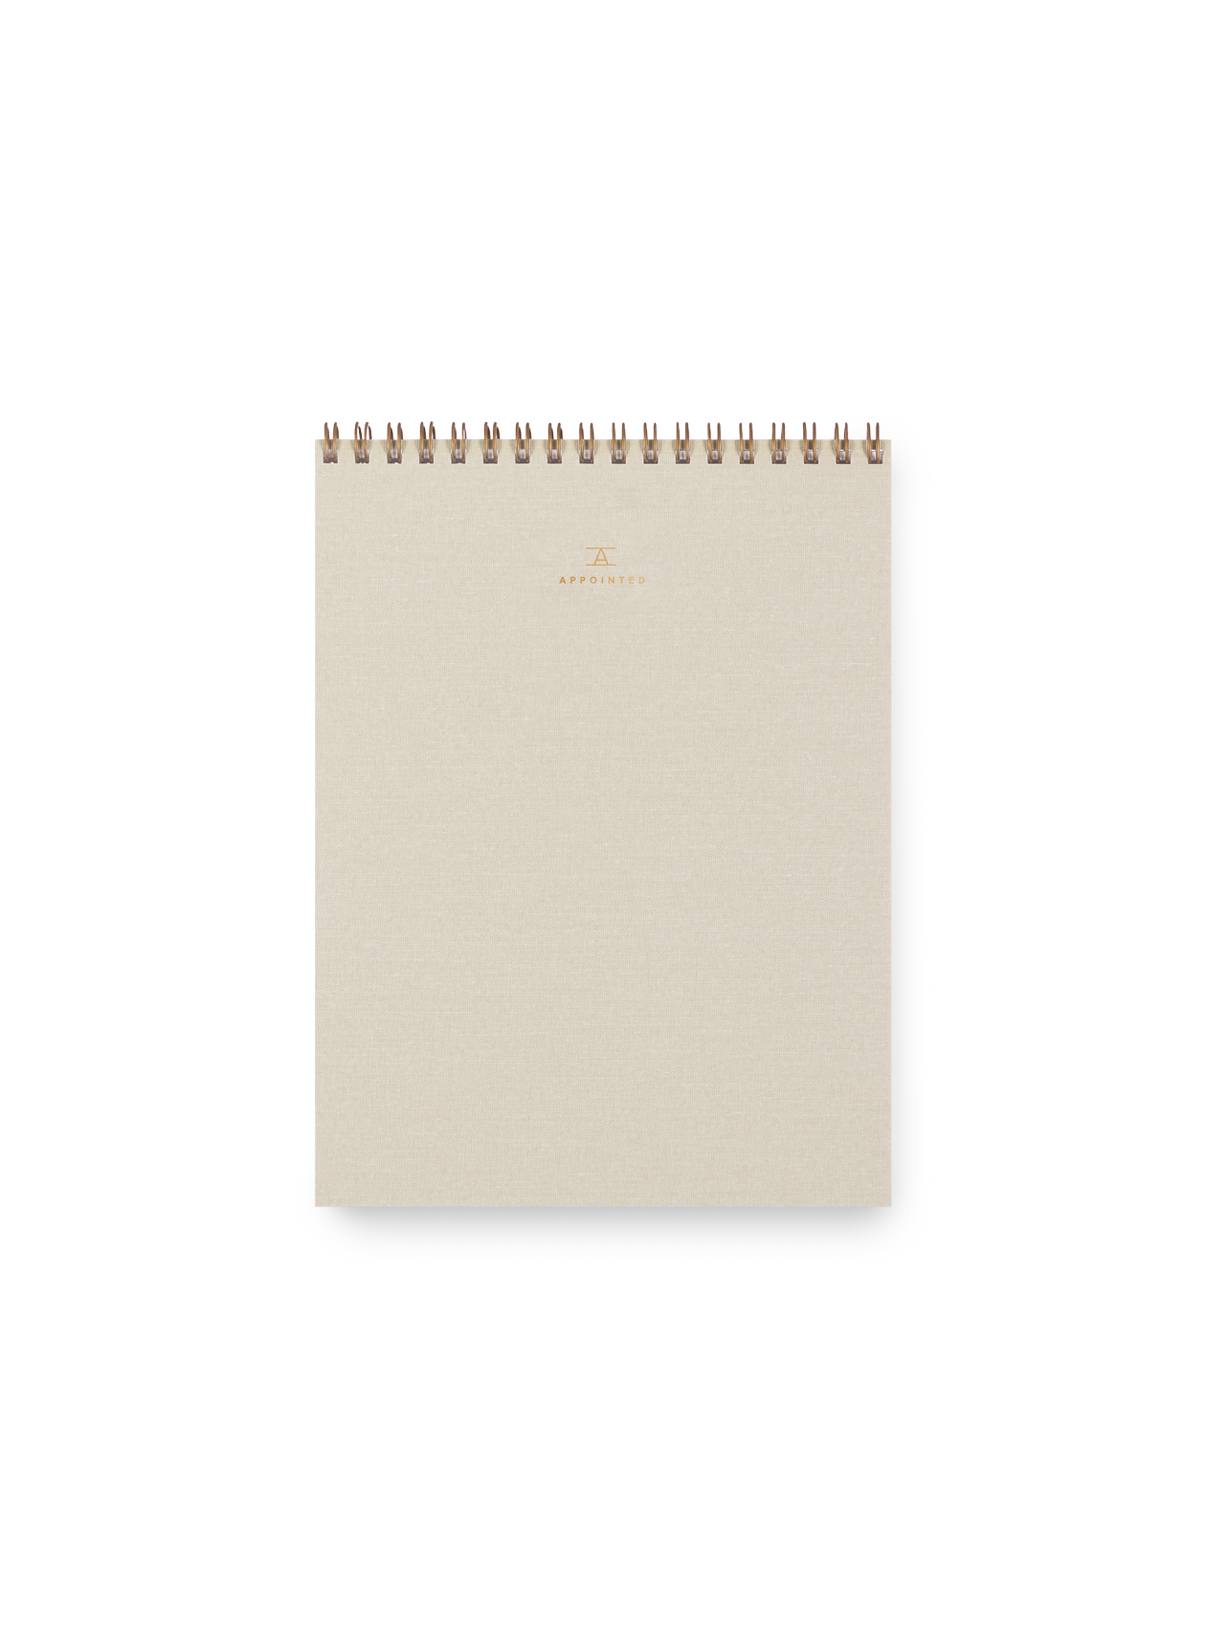 Appointed Office Notepad with gold foil details, bookcloth cover, and brass wire-o binding || Natural Linen